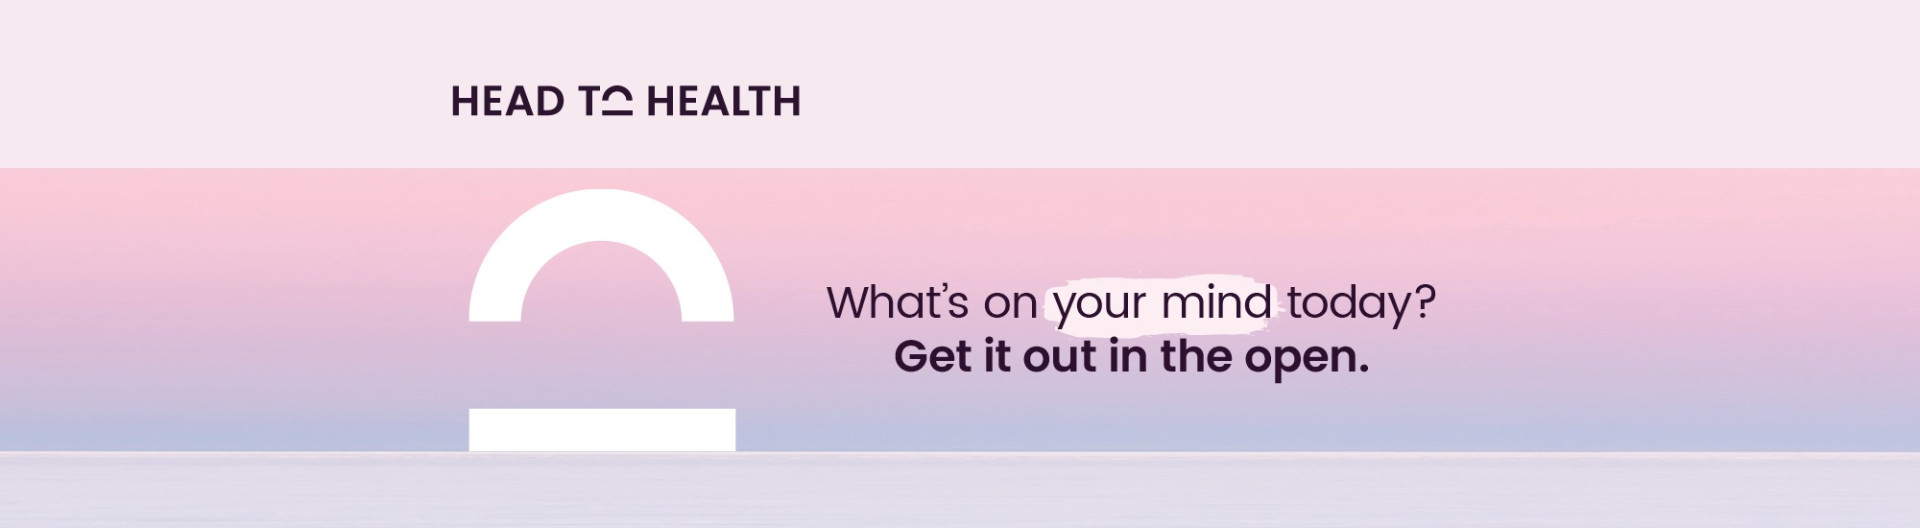 Head to Health logo reads: What's on your mind today? Get it out in the open.